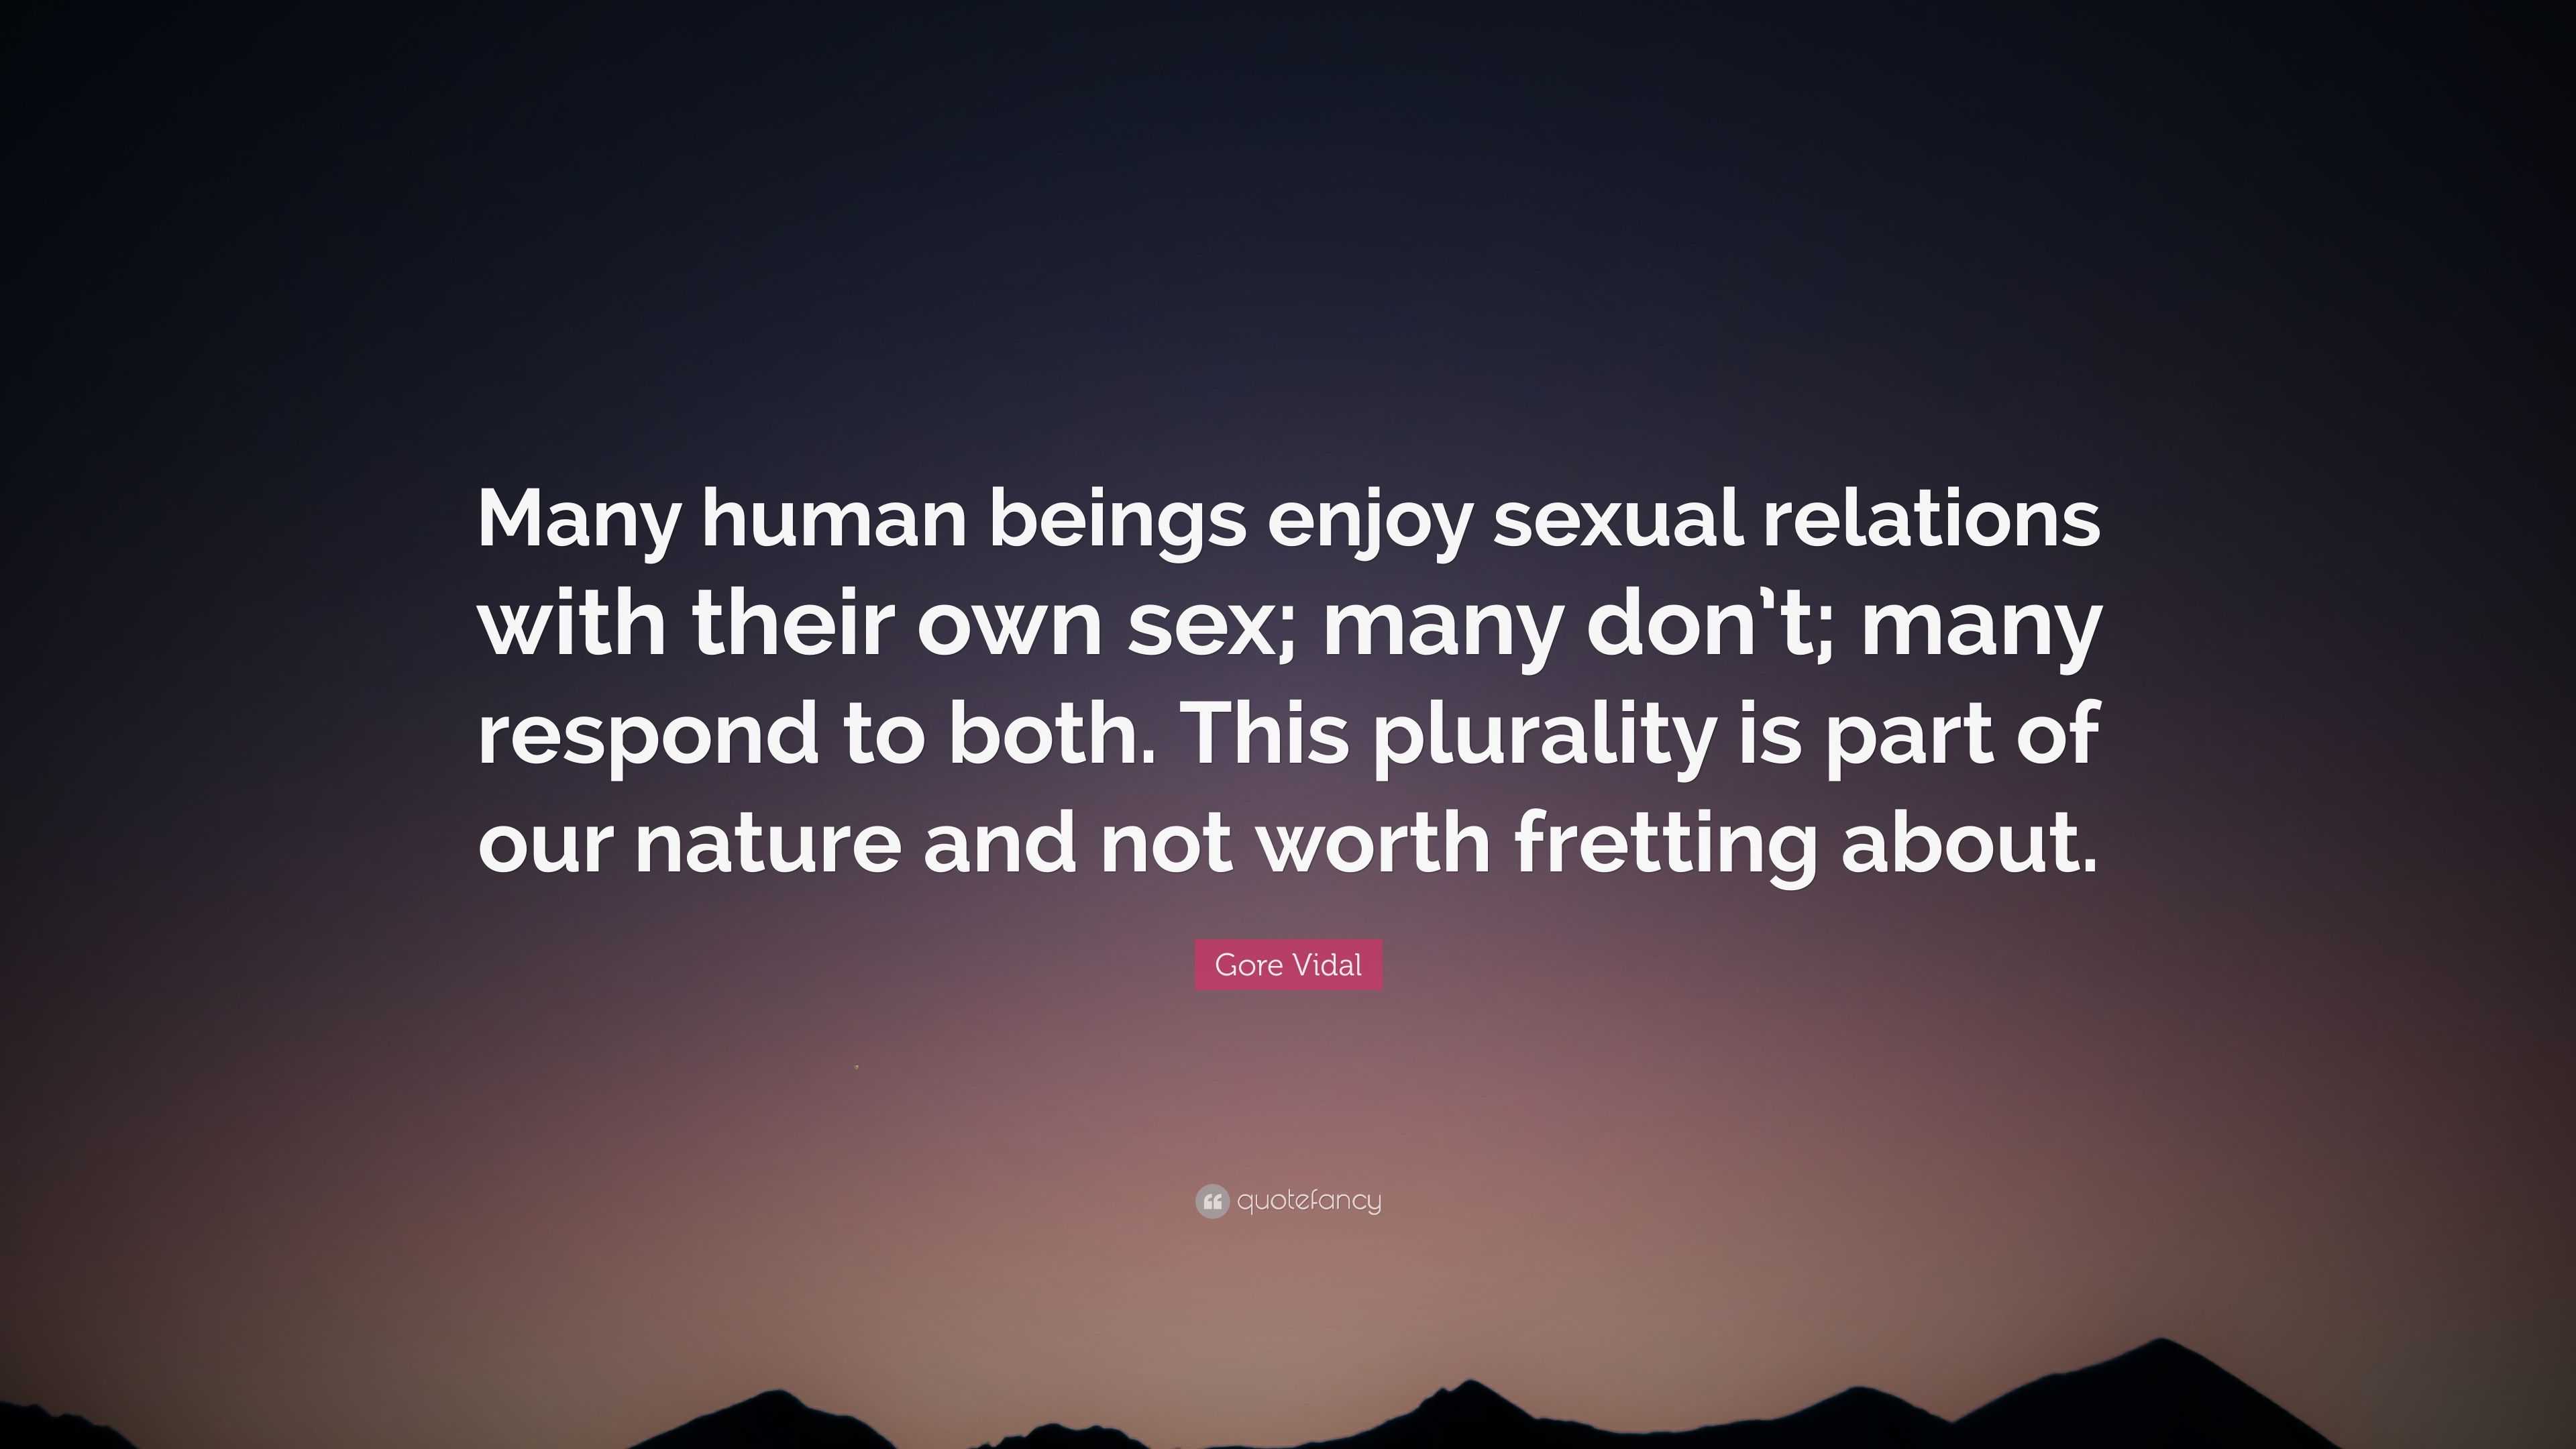 humans are sexual beings